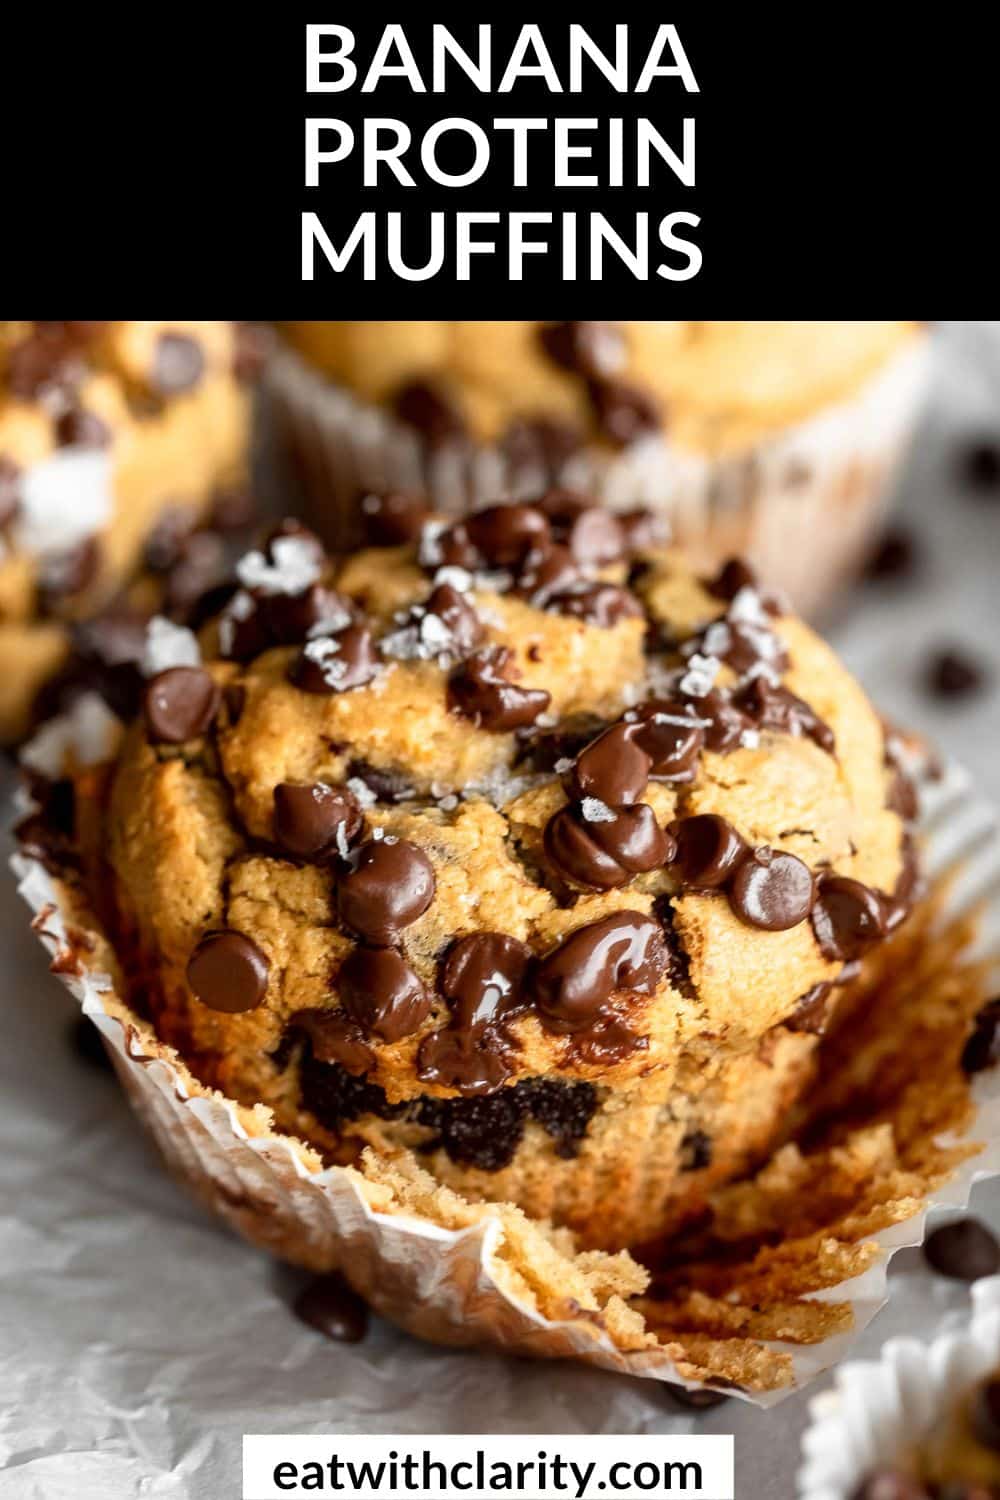 Banana Protein Muffins - Eat With Clarity